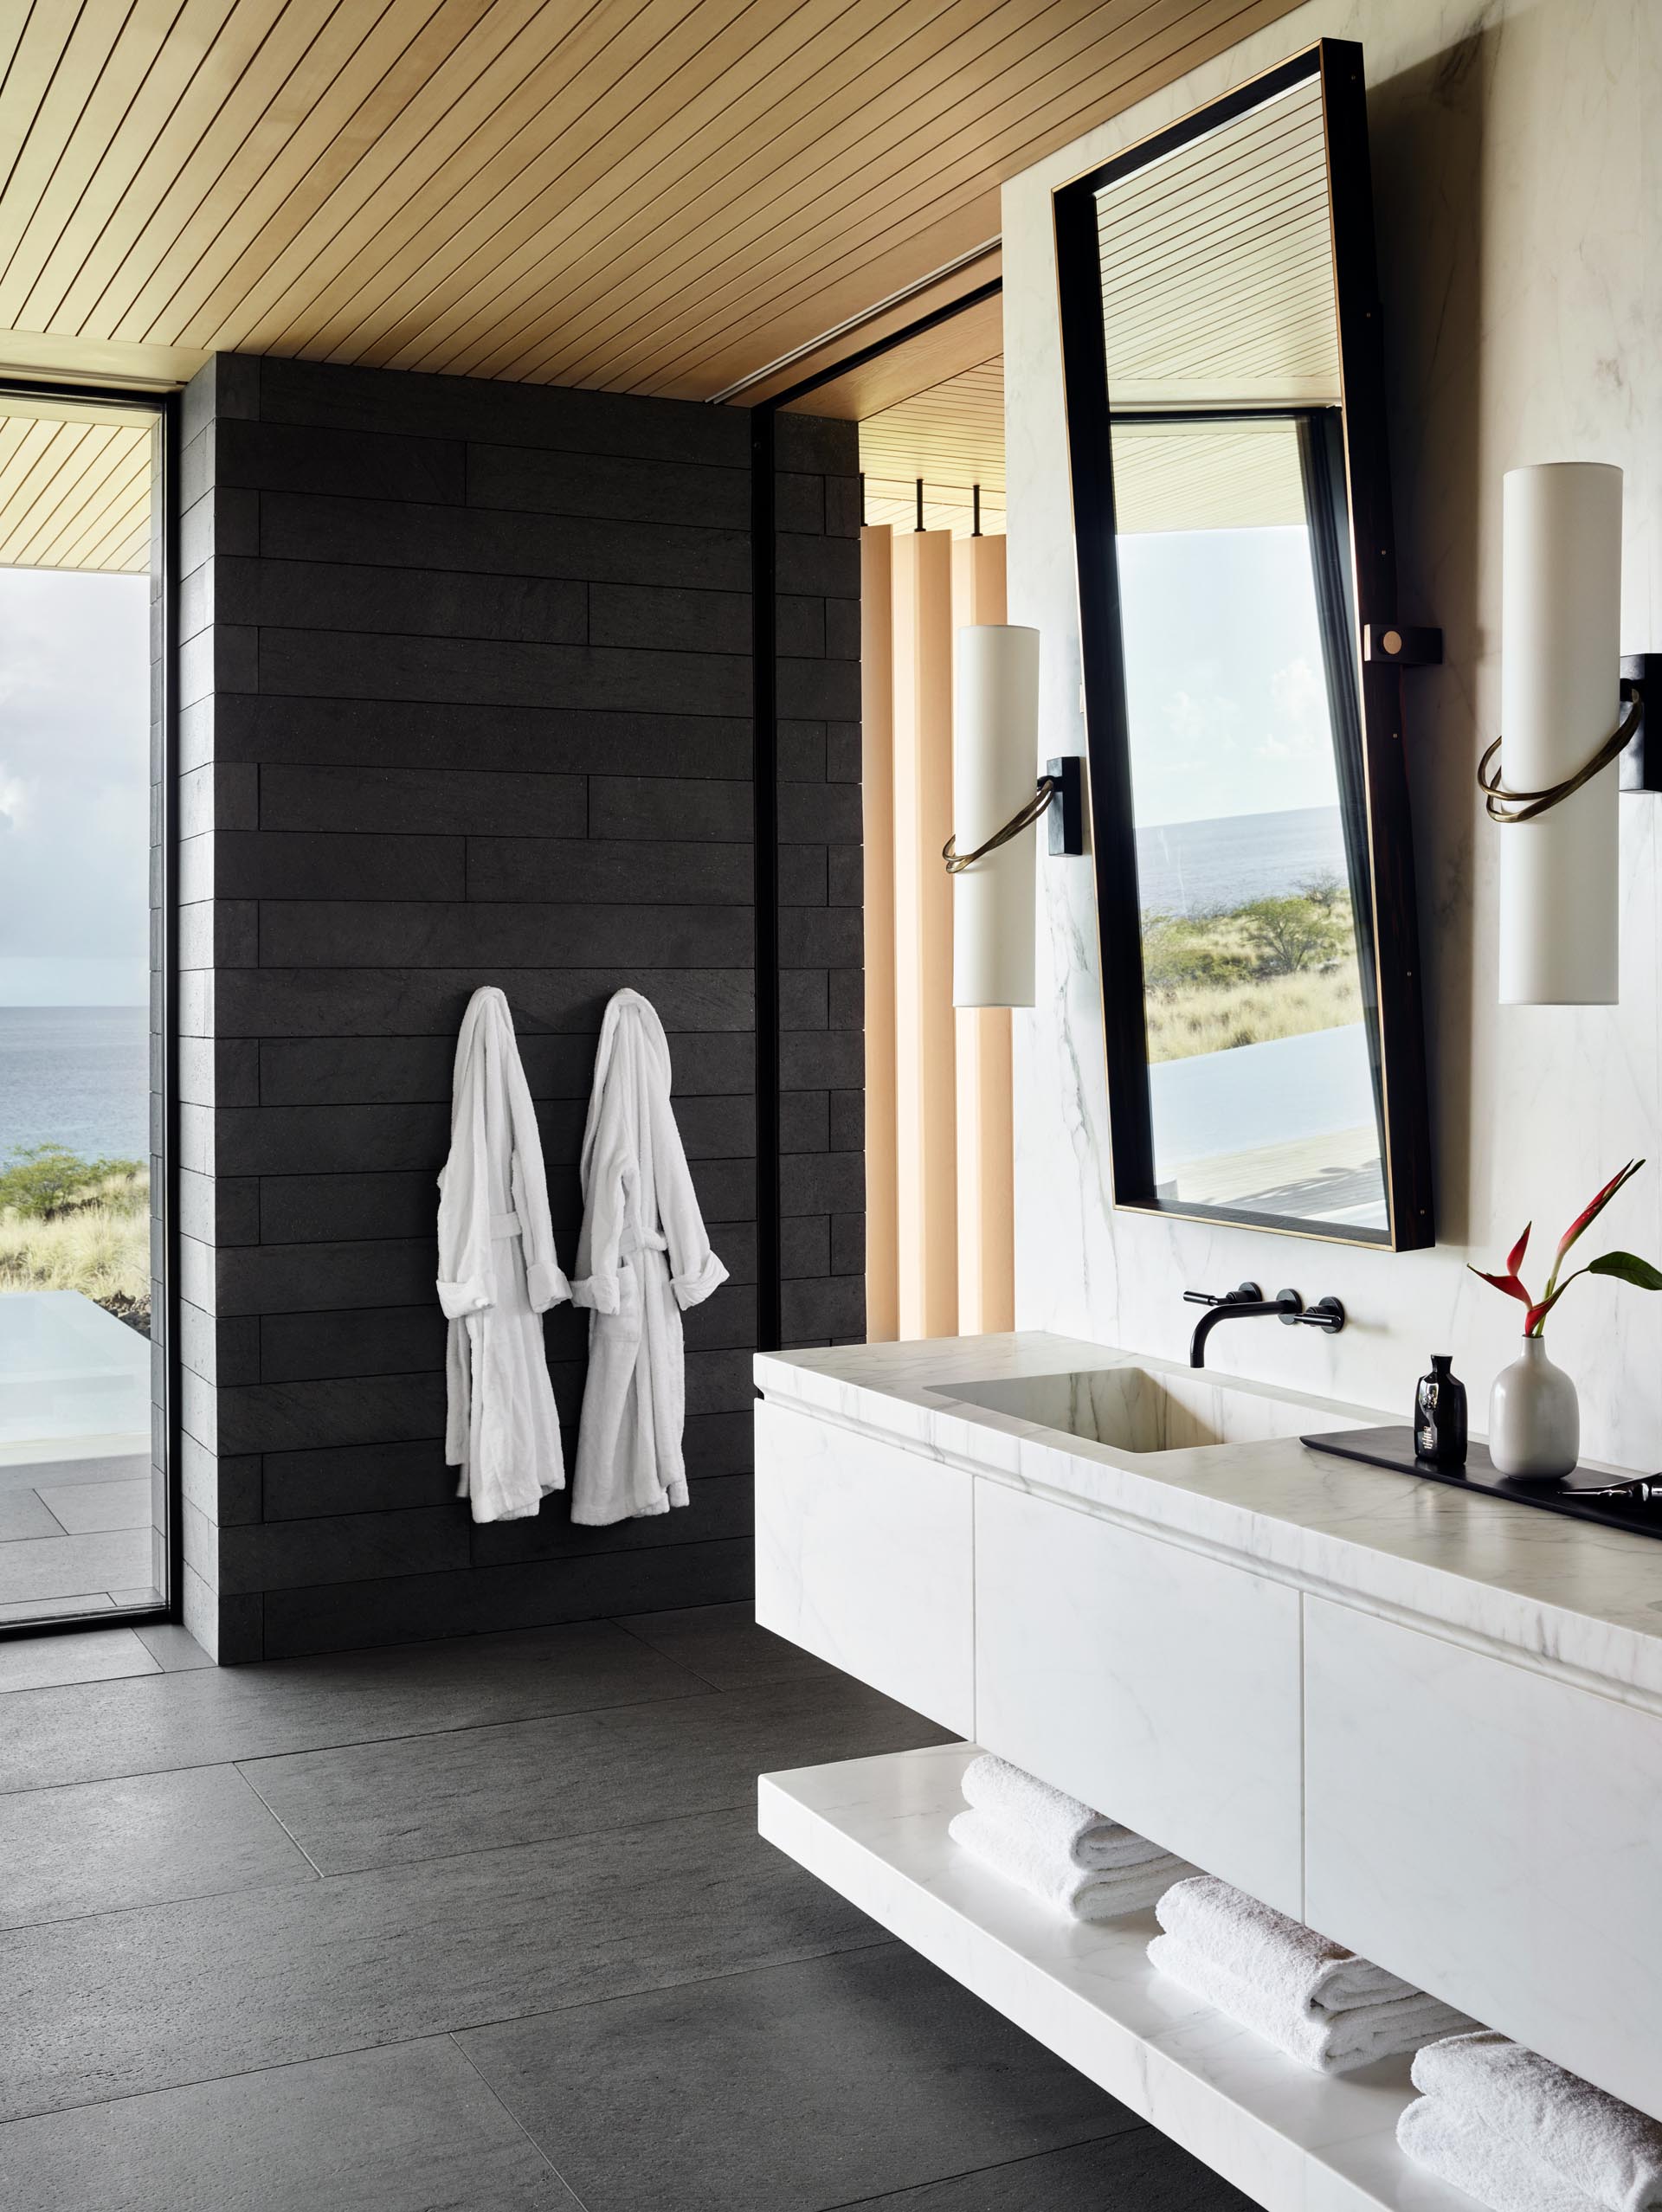 In the master bathroom, large format gray tiles cover the floor, vertical wood screens create privacy, and a white double-sink vanity floats above the ground and is adjacent to the glass-enclosed shower.